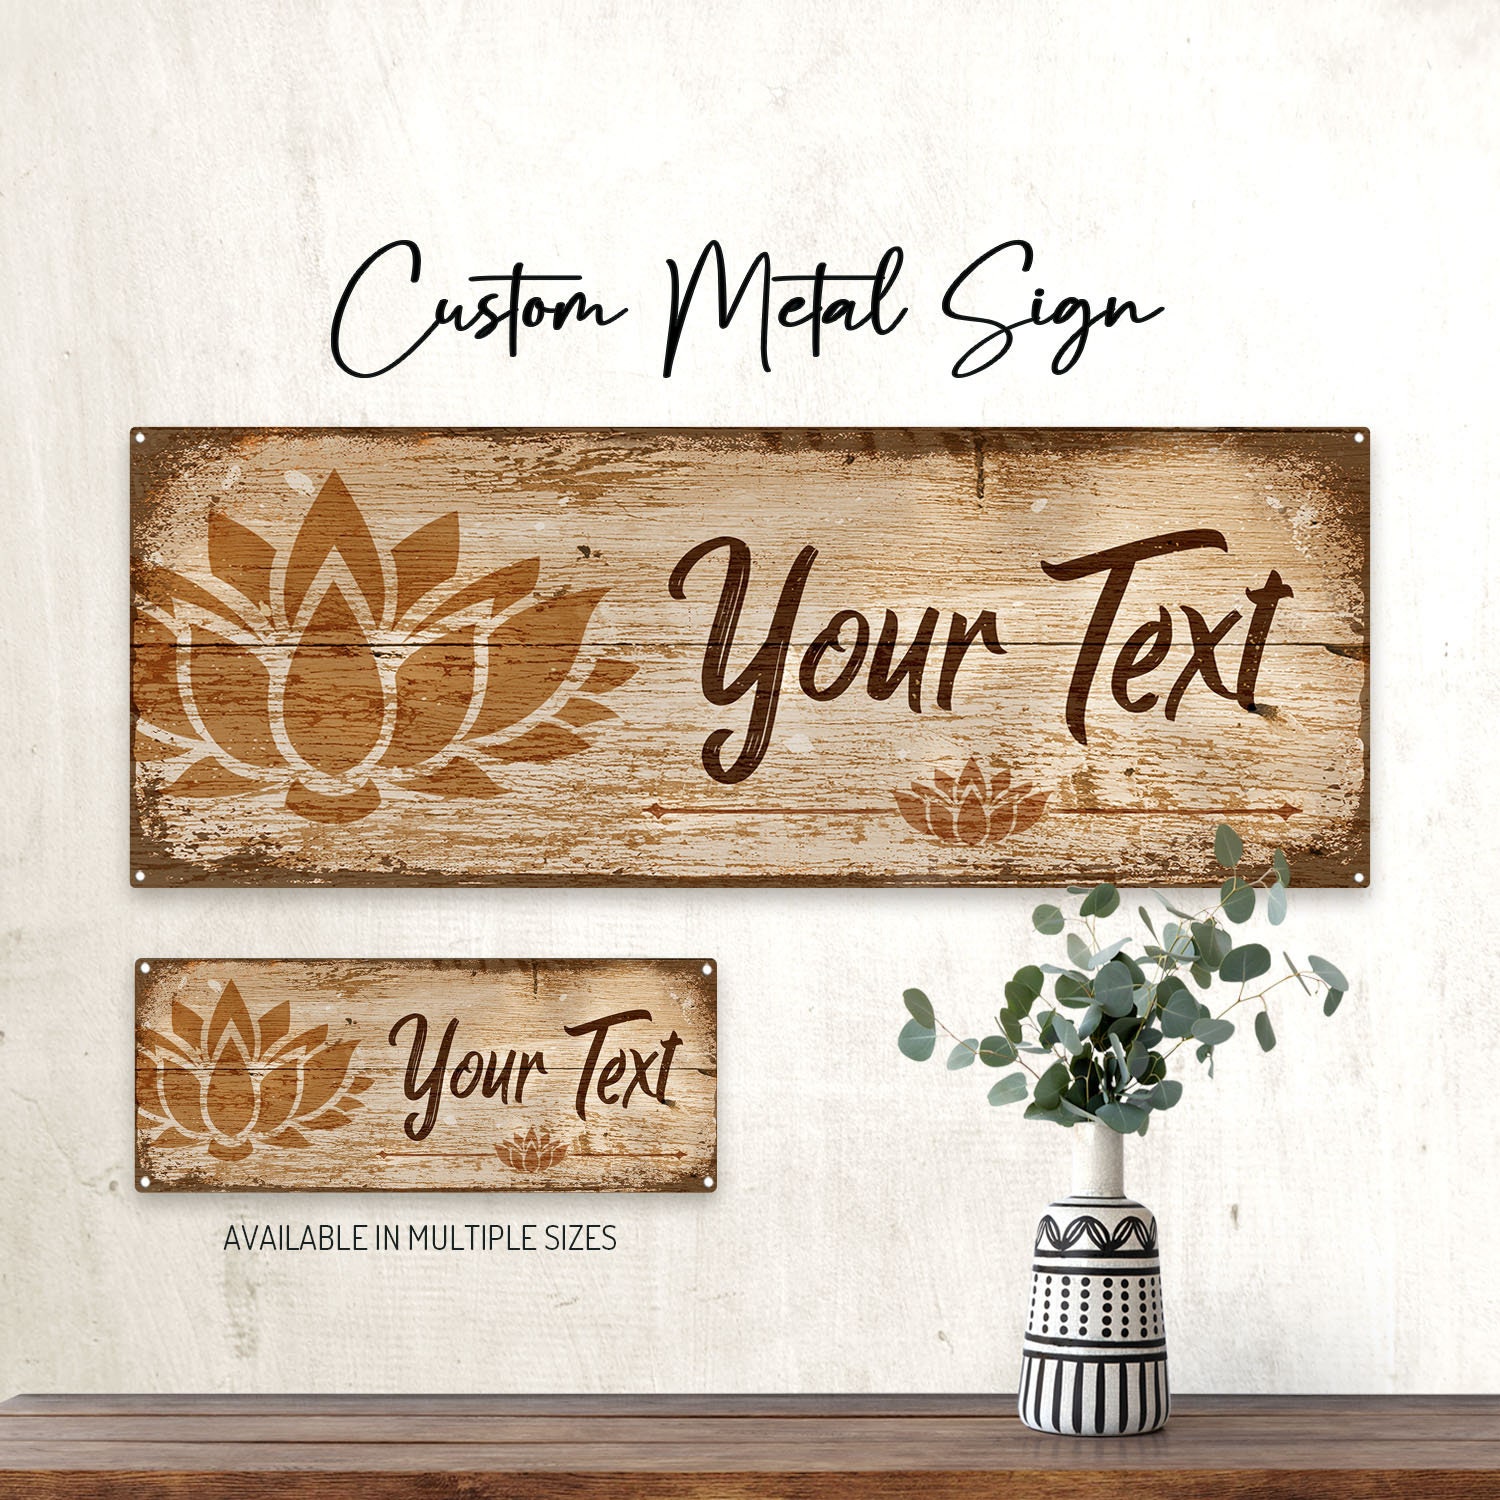 Personalized Craft Room Sign Art Studio Decor Painting Pottery Gift fo —  Chico Creek Signs